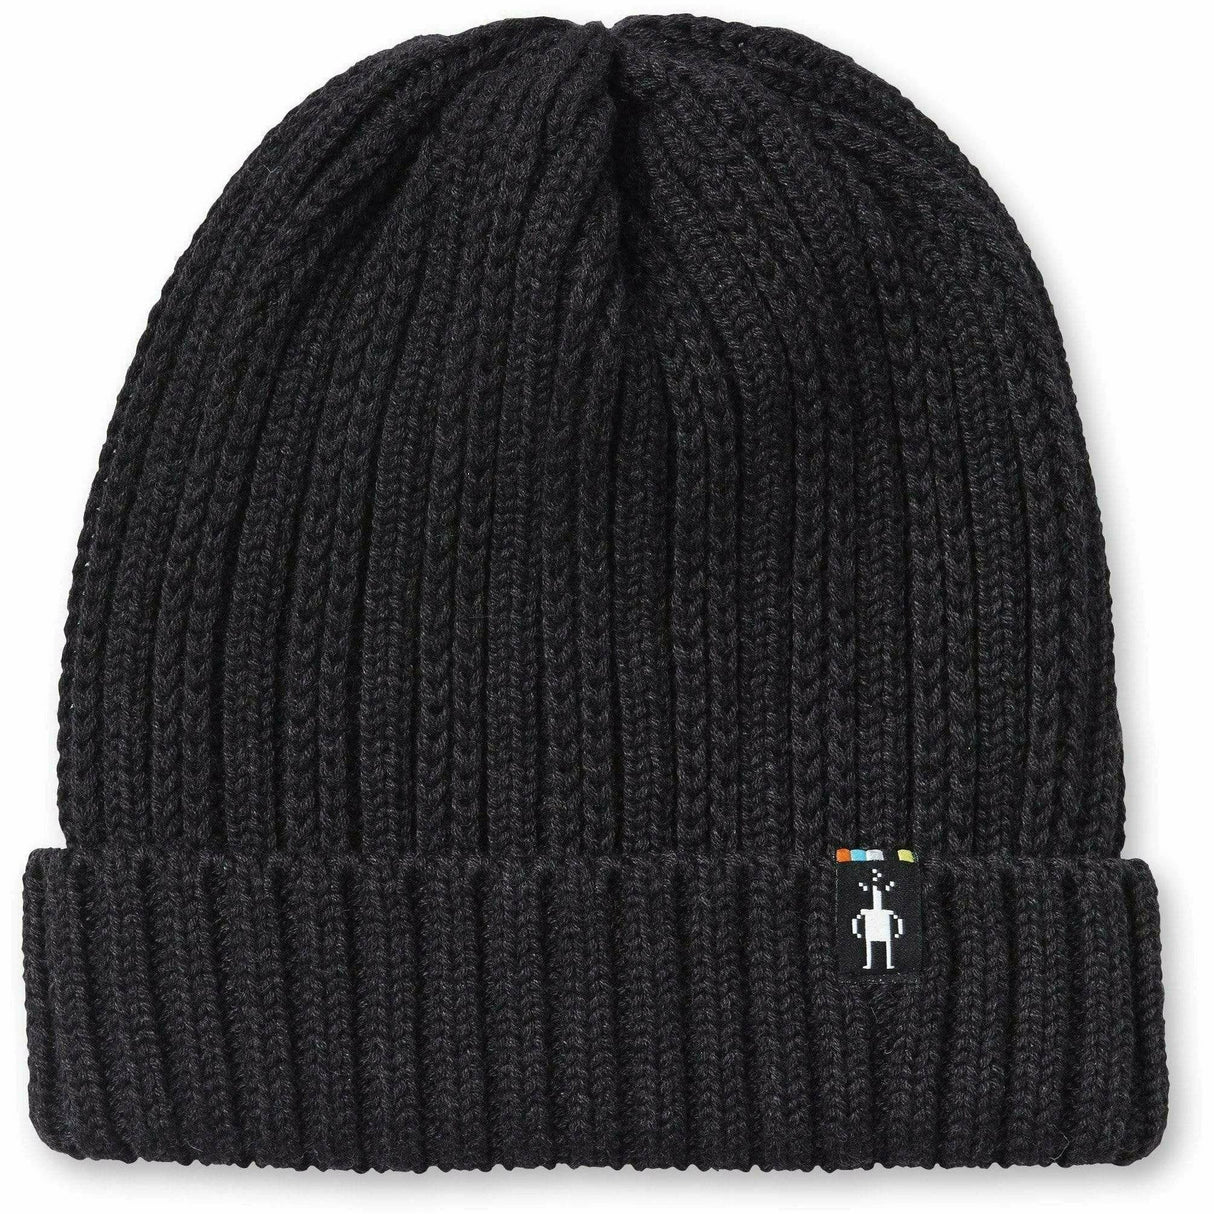 Smartwool Rib Knit Hat  -  One Size Fits Most / Charcoal Heather